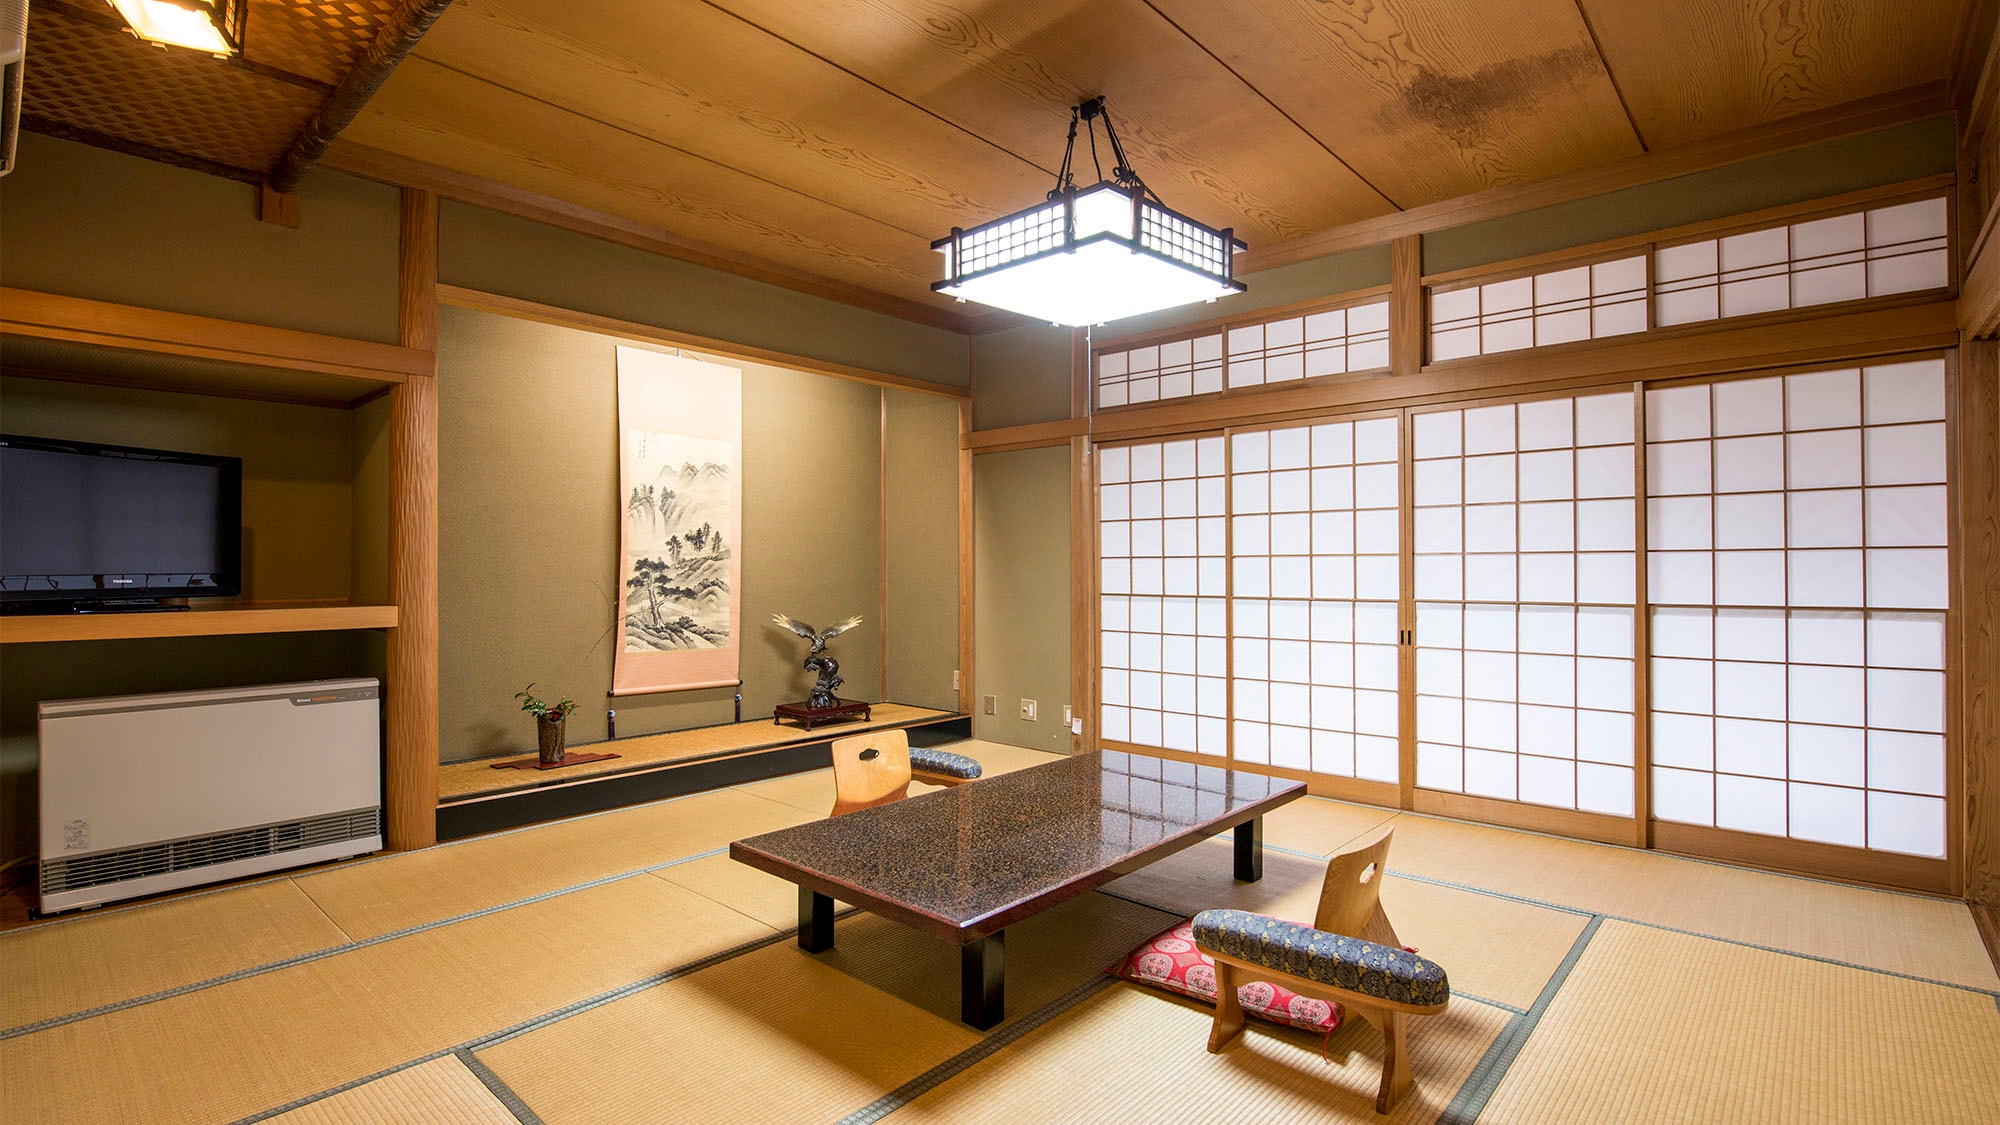 ・ Main building standard guest room: Japanese-style calm appearance